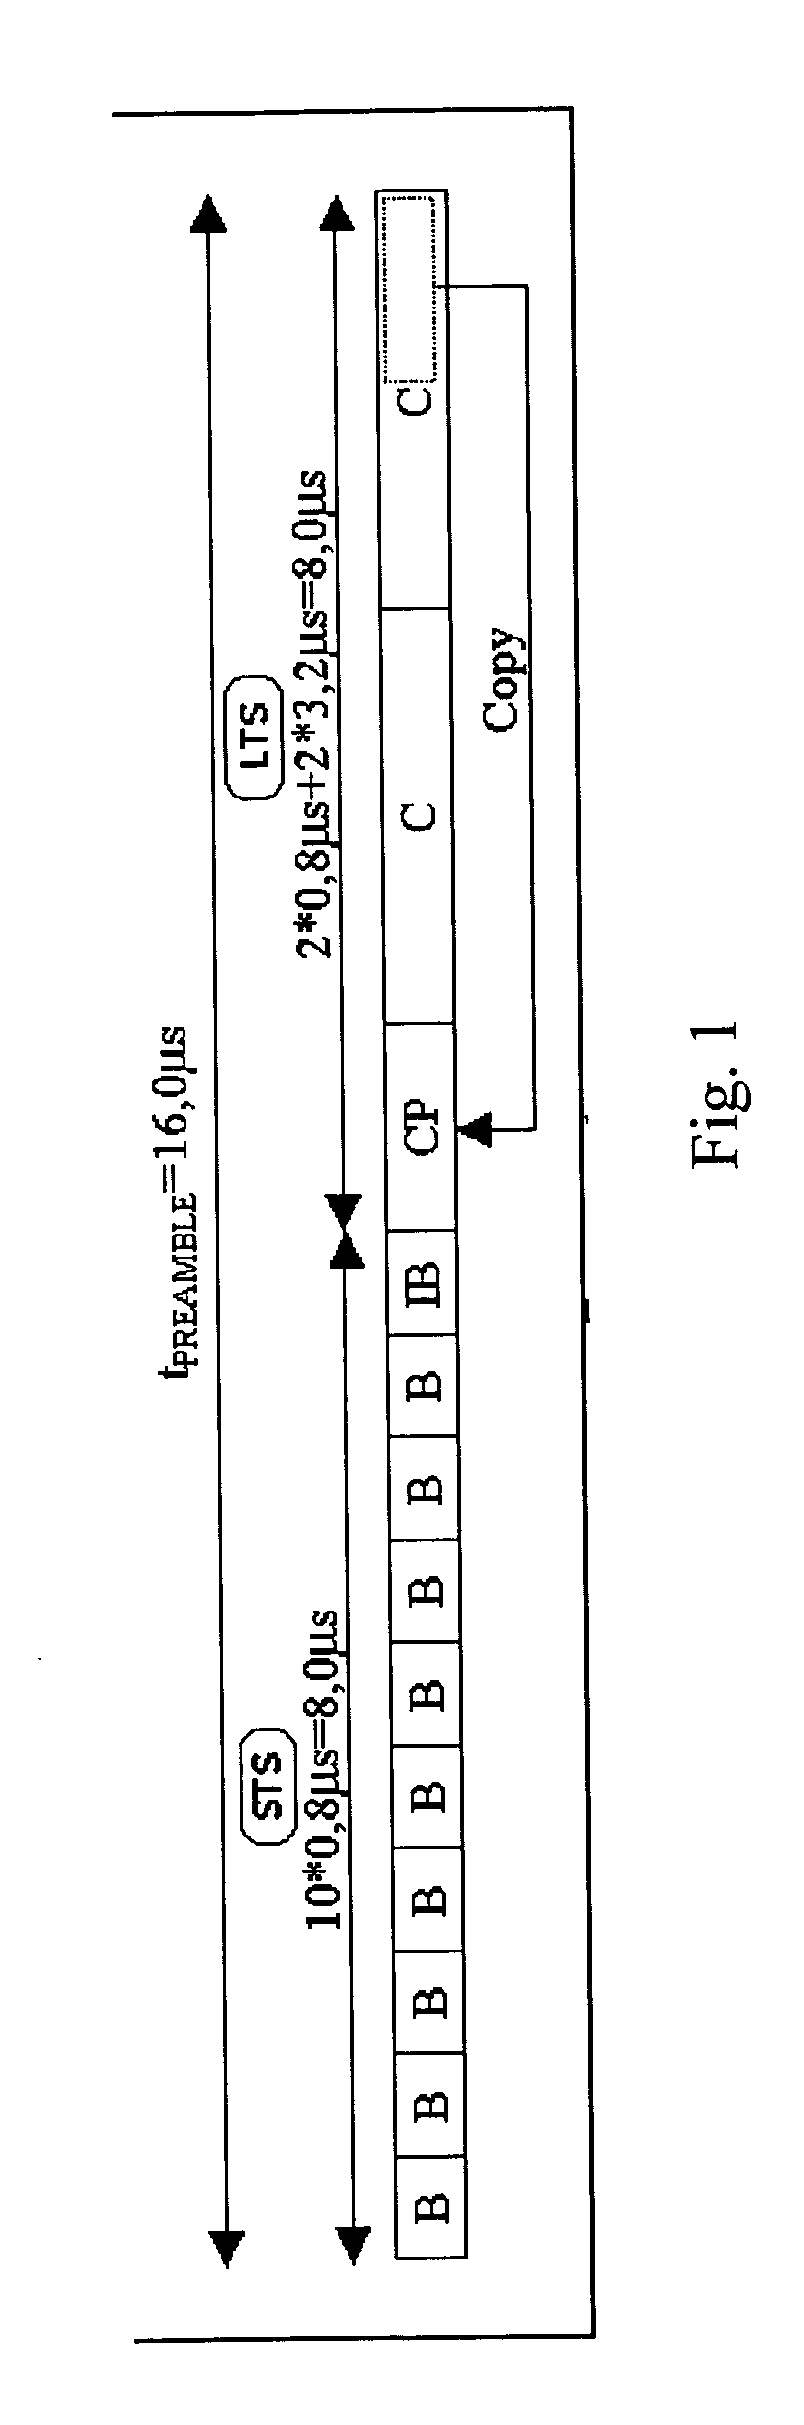 Method and apparatus for improving the quality of channel estimation algorithms using training sequences